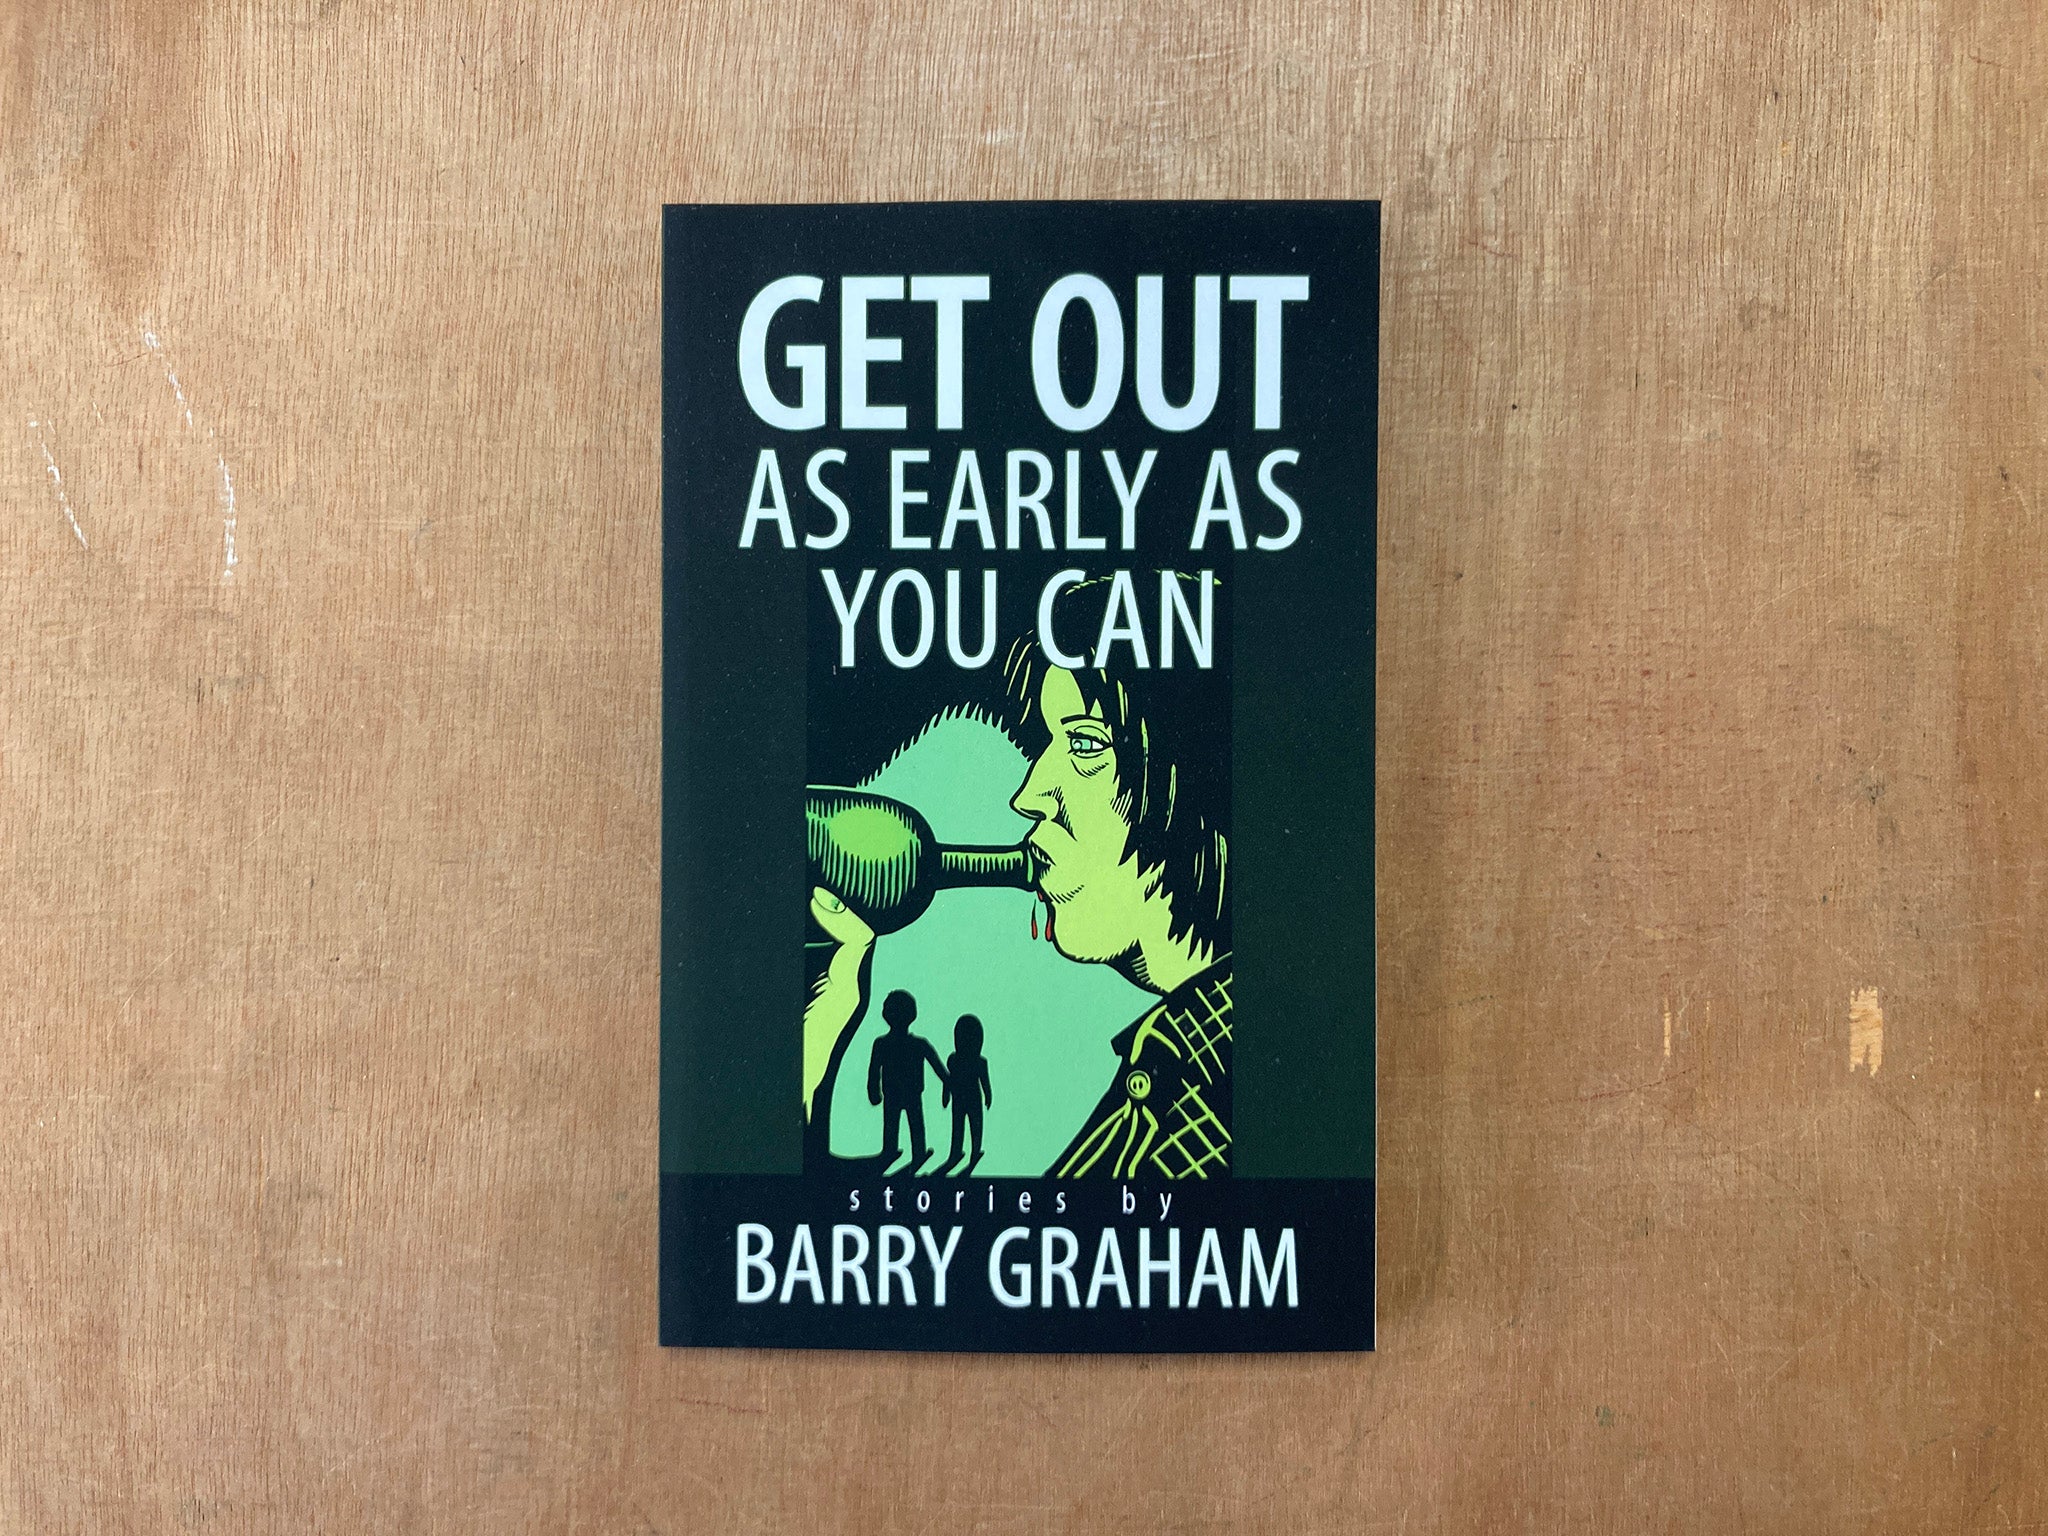 GET OUT AS EARLY AS YOU CAN by Barry Graham